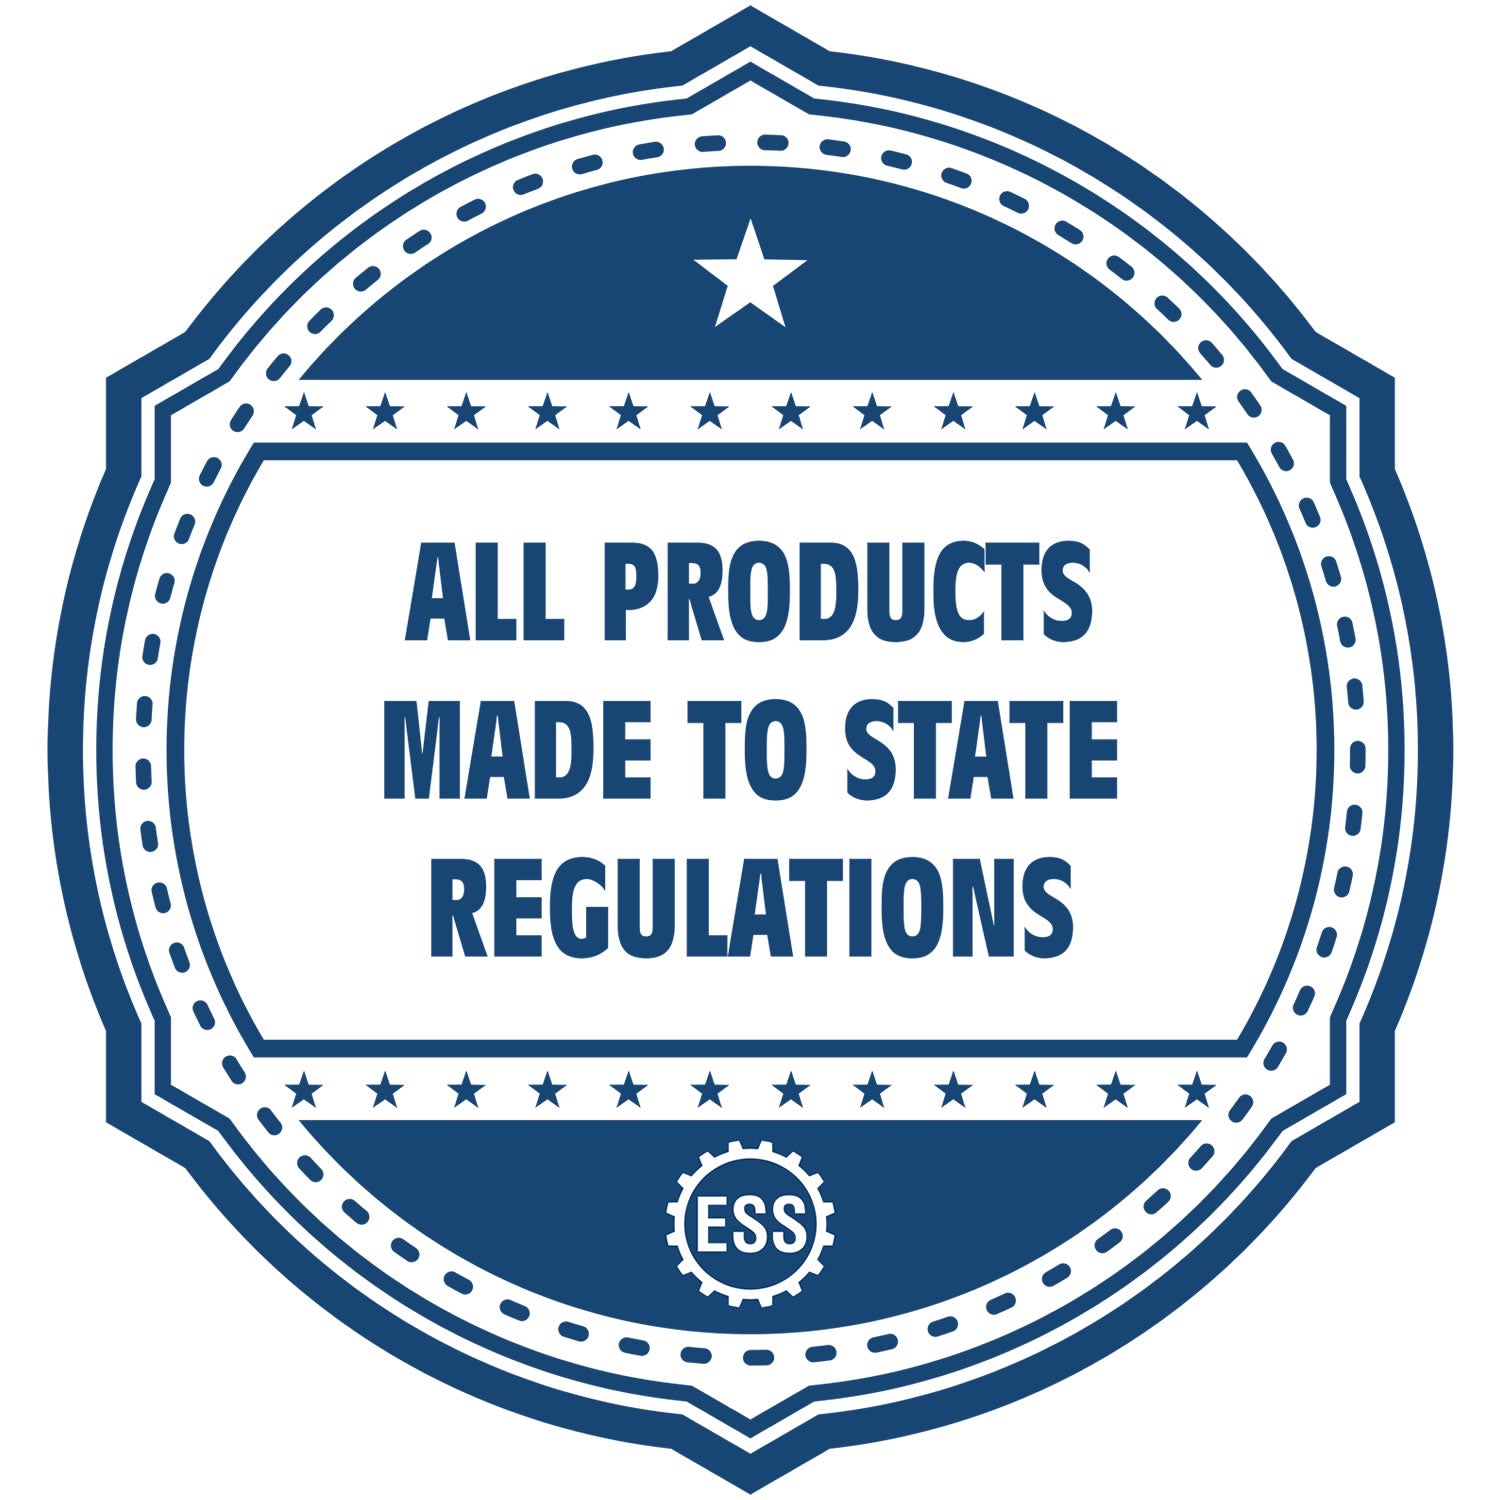 An icon or badge element for the Heavy Duty Cast Iron New Mexico Land Surveyor Seal Embosser showing that this product is made in compliance with state regulations.